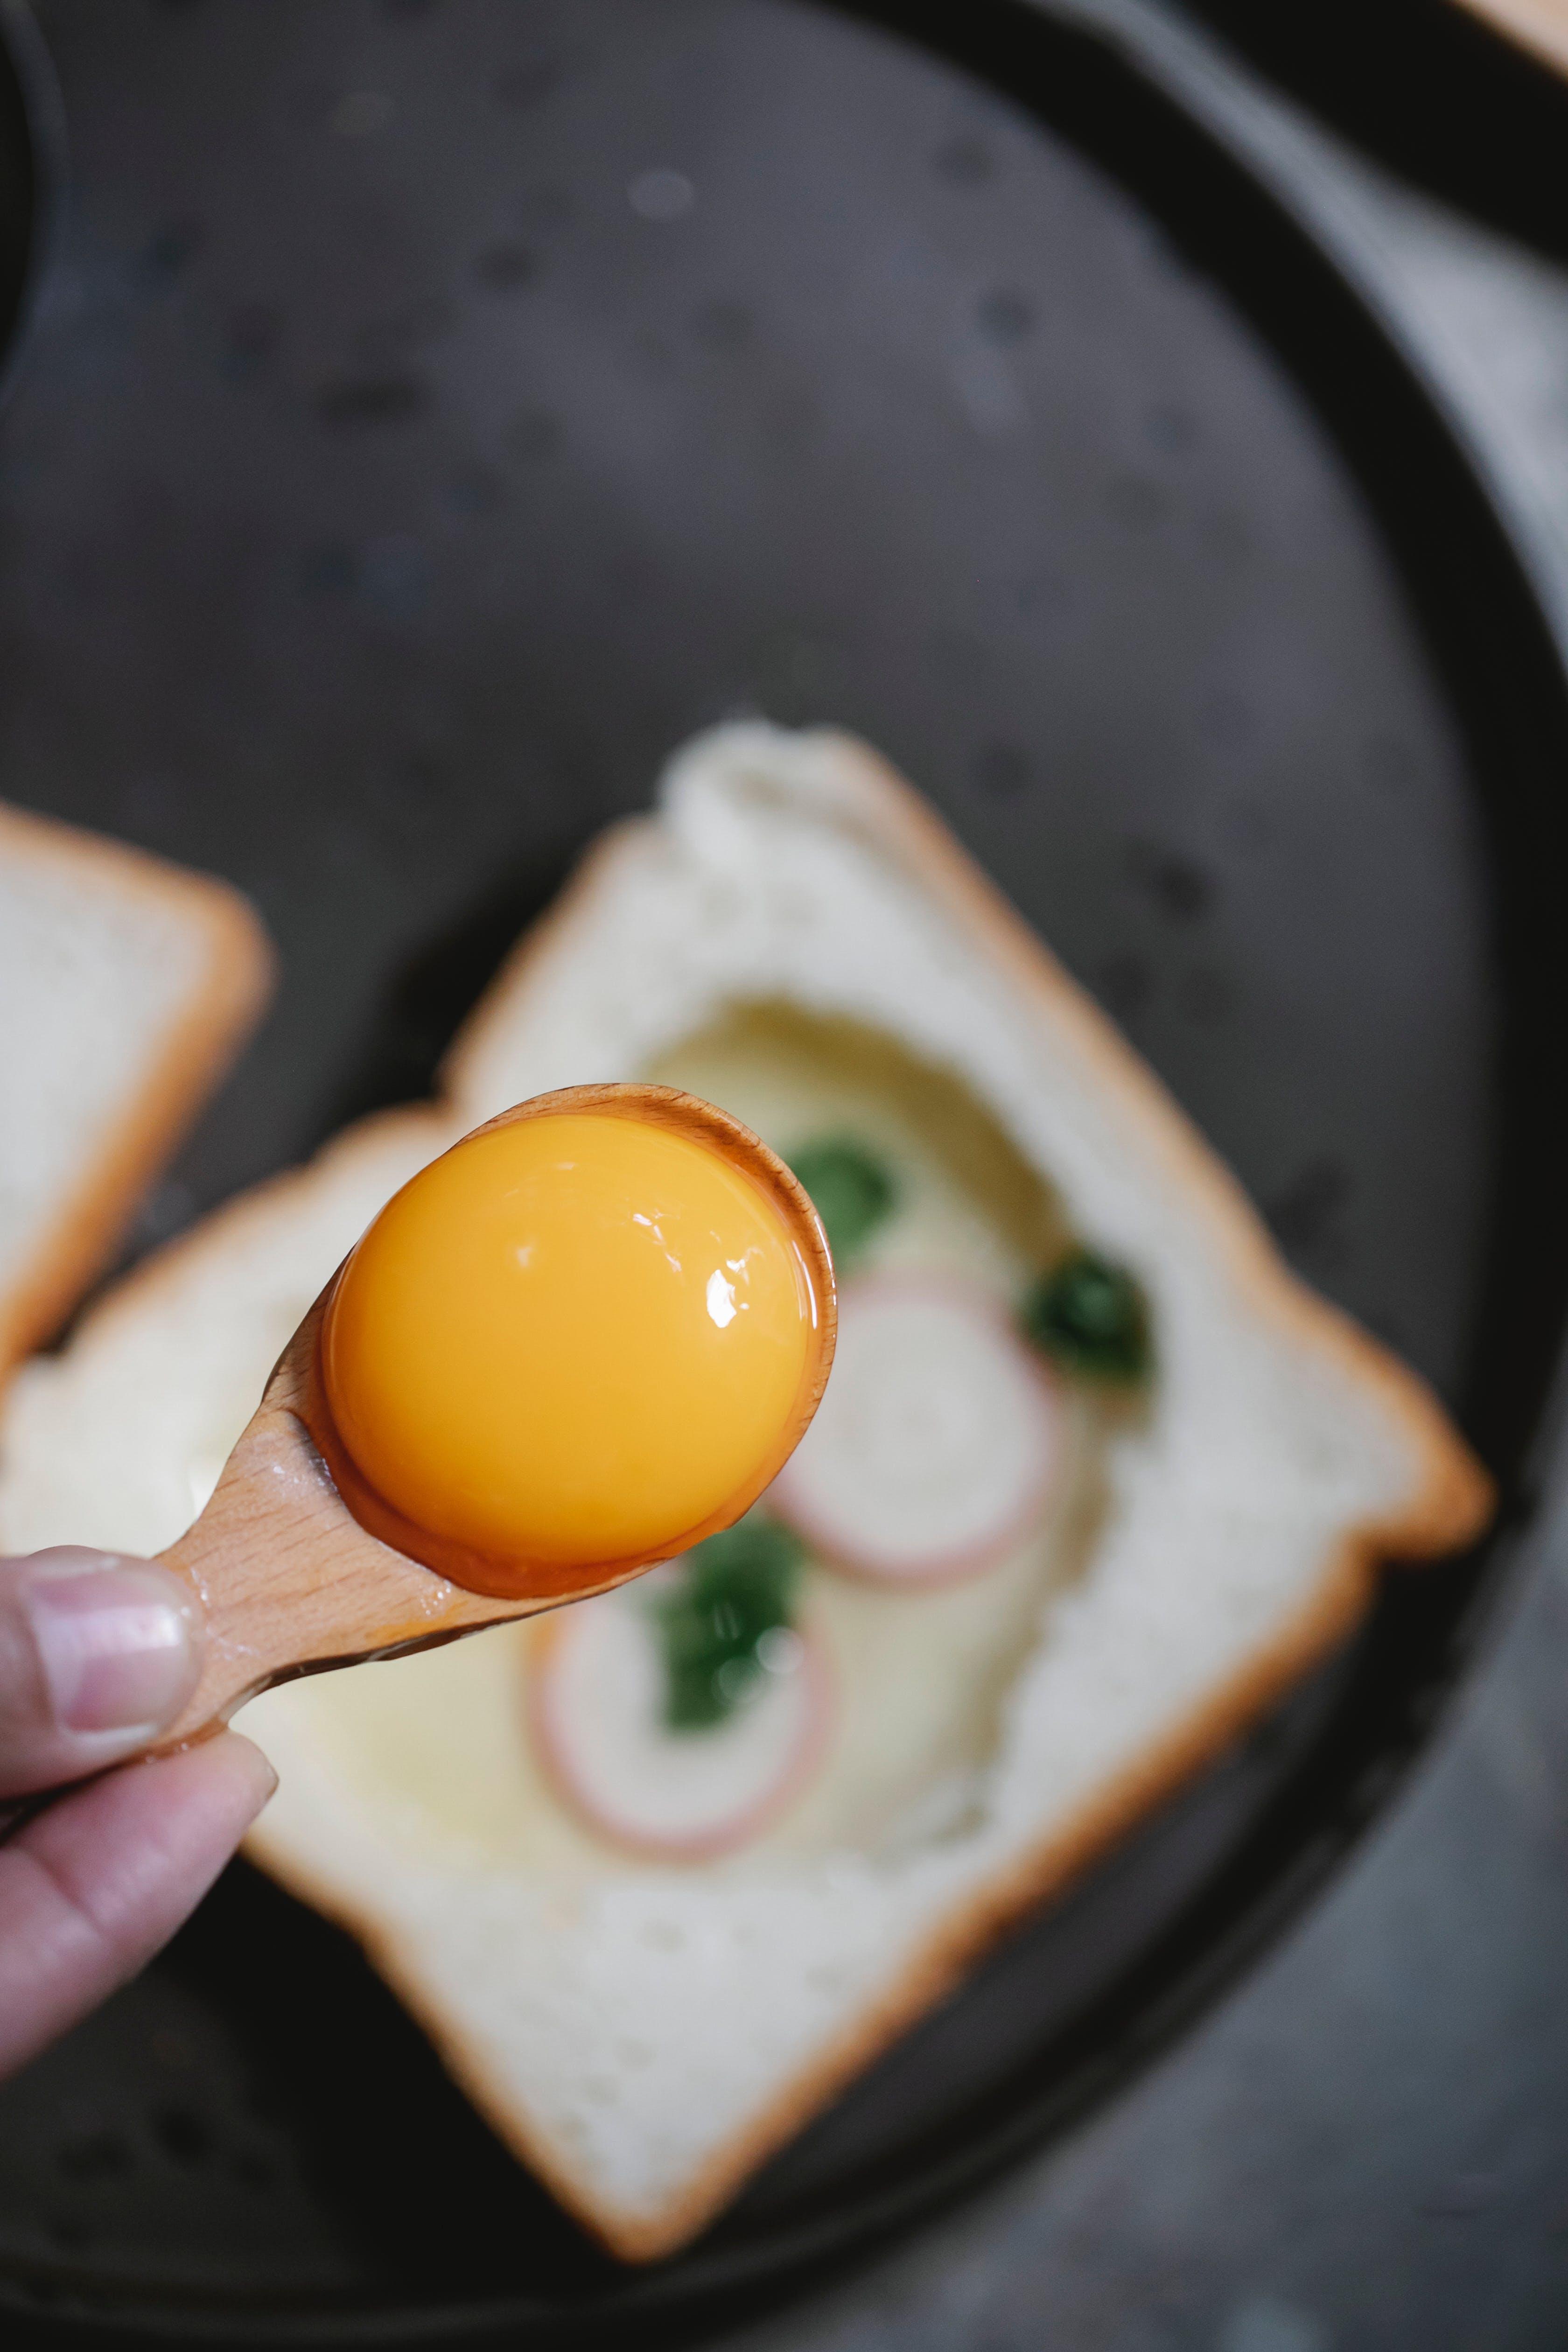 Why is cooking an egg a physical change? 